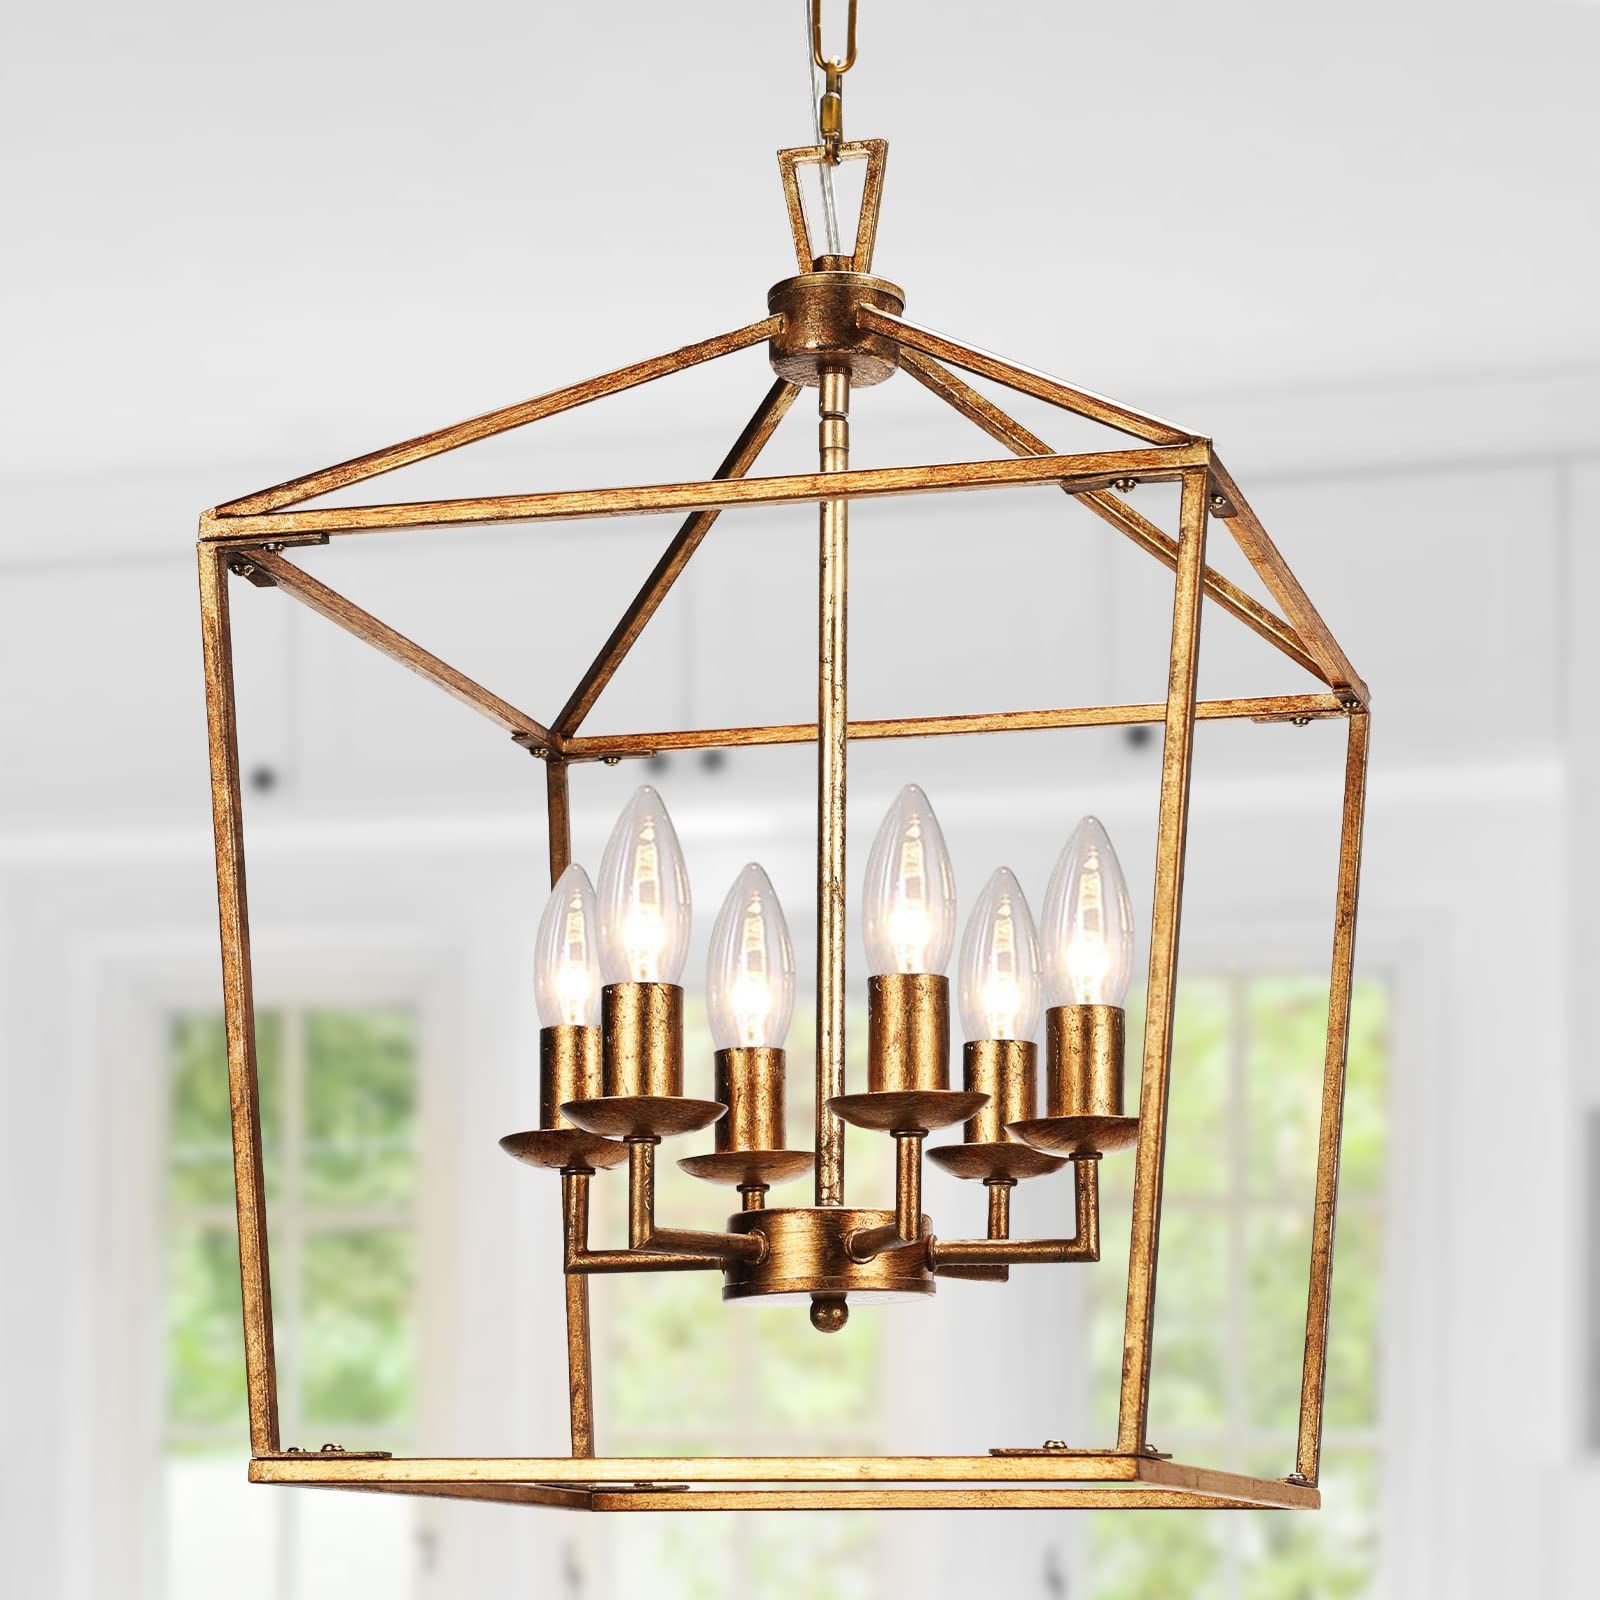 Newest Gild One Light Lantern Chandeliers Within Gold Chandelier Lantern Light Fixtures – 6 Light Retro Foyer Pendant Light,  Rustic Pendant Lighting For Kitchen Island, Hang Lighting With Adjustable  Chain, Hand Pasted Gold Foil Finish – – Amazon (View 7 of 15)